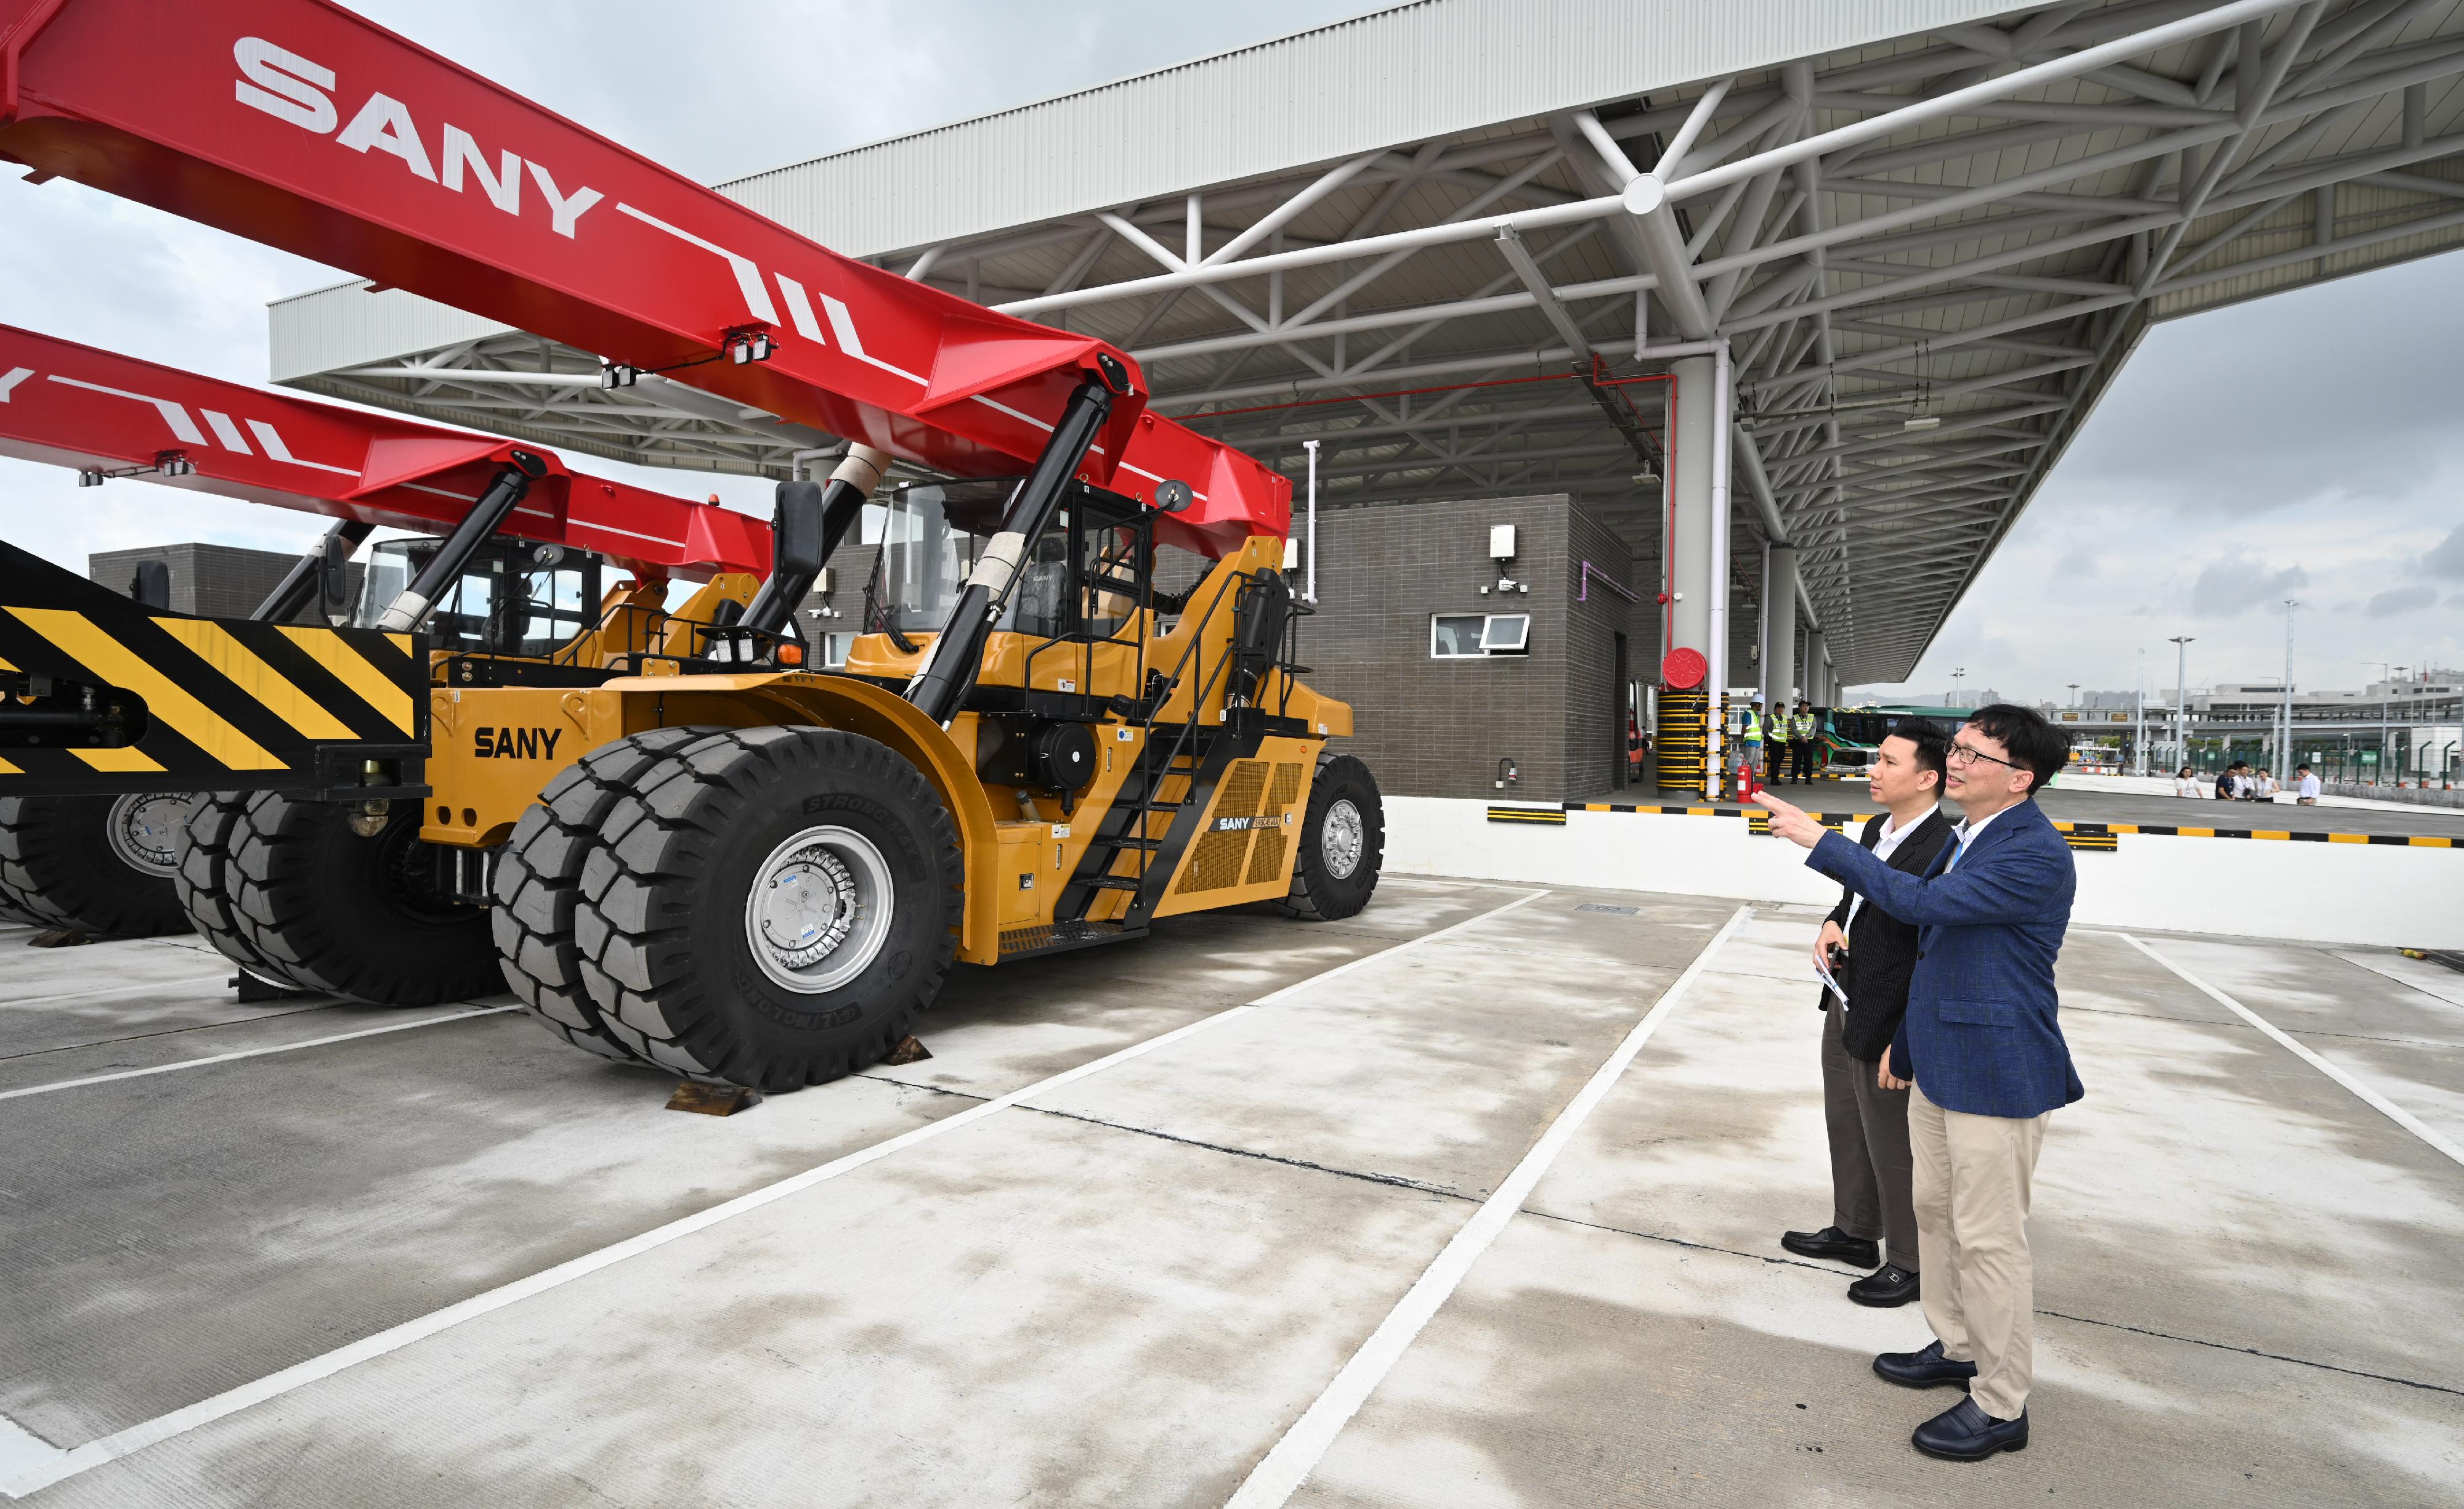 Following the discussions and agreement made between the governments of Hong Kong and Macao, the arrangement for Hong Kong-Macao cross-boundary goods vehicles using the Hong Kong-Zhuhai-Macao Bridge (HZMB) will be implemented. Photo shows the Under Secretary for Transport and Logistics, Mr Liu Chun-san (right), visiting the HZMB Macao Port logistics transfer facility today (August 7). 